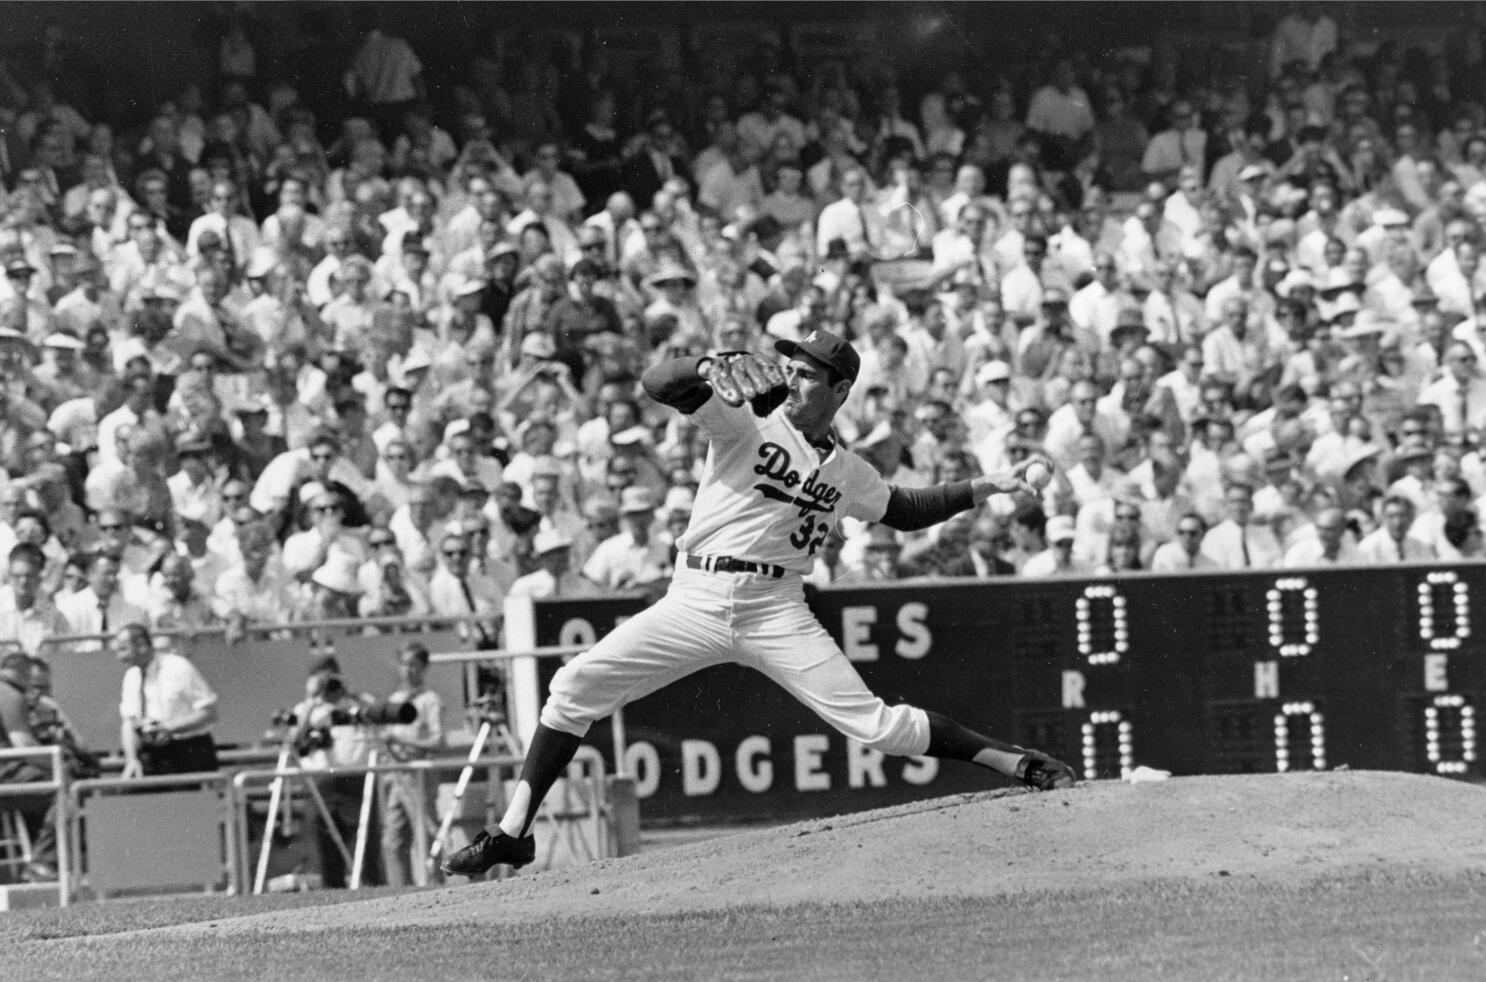 Dodgers World Series - Wood – The All-Time